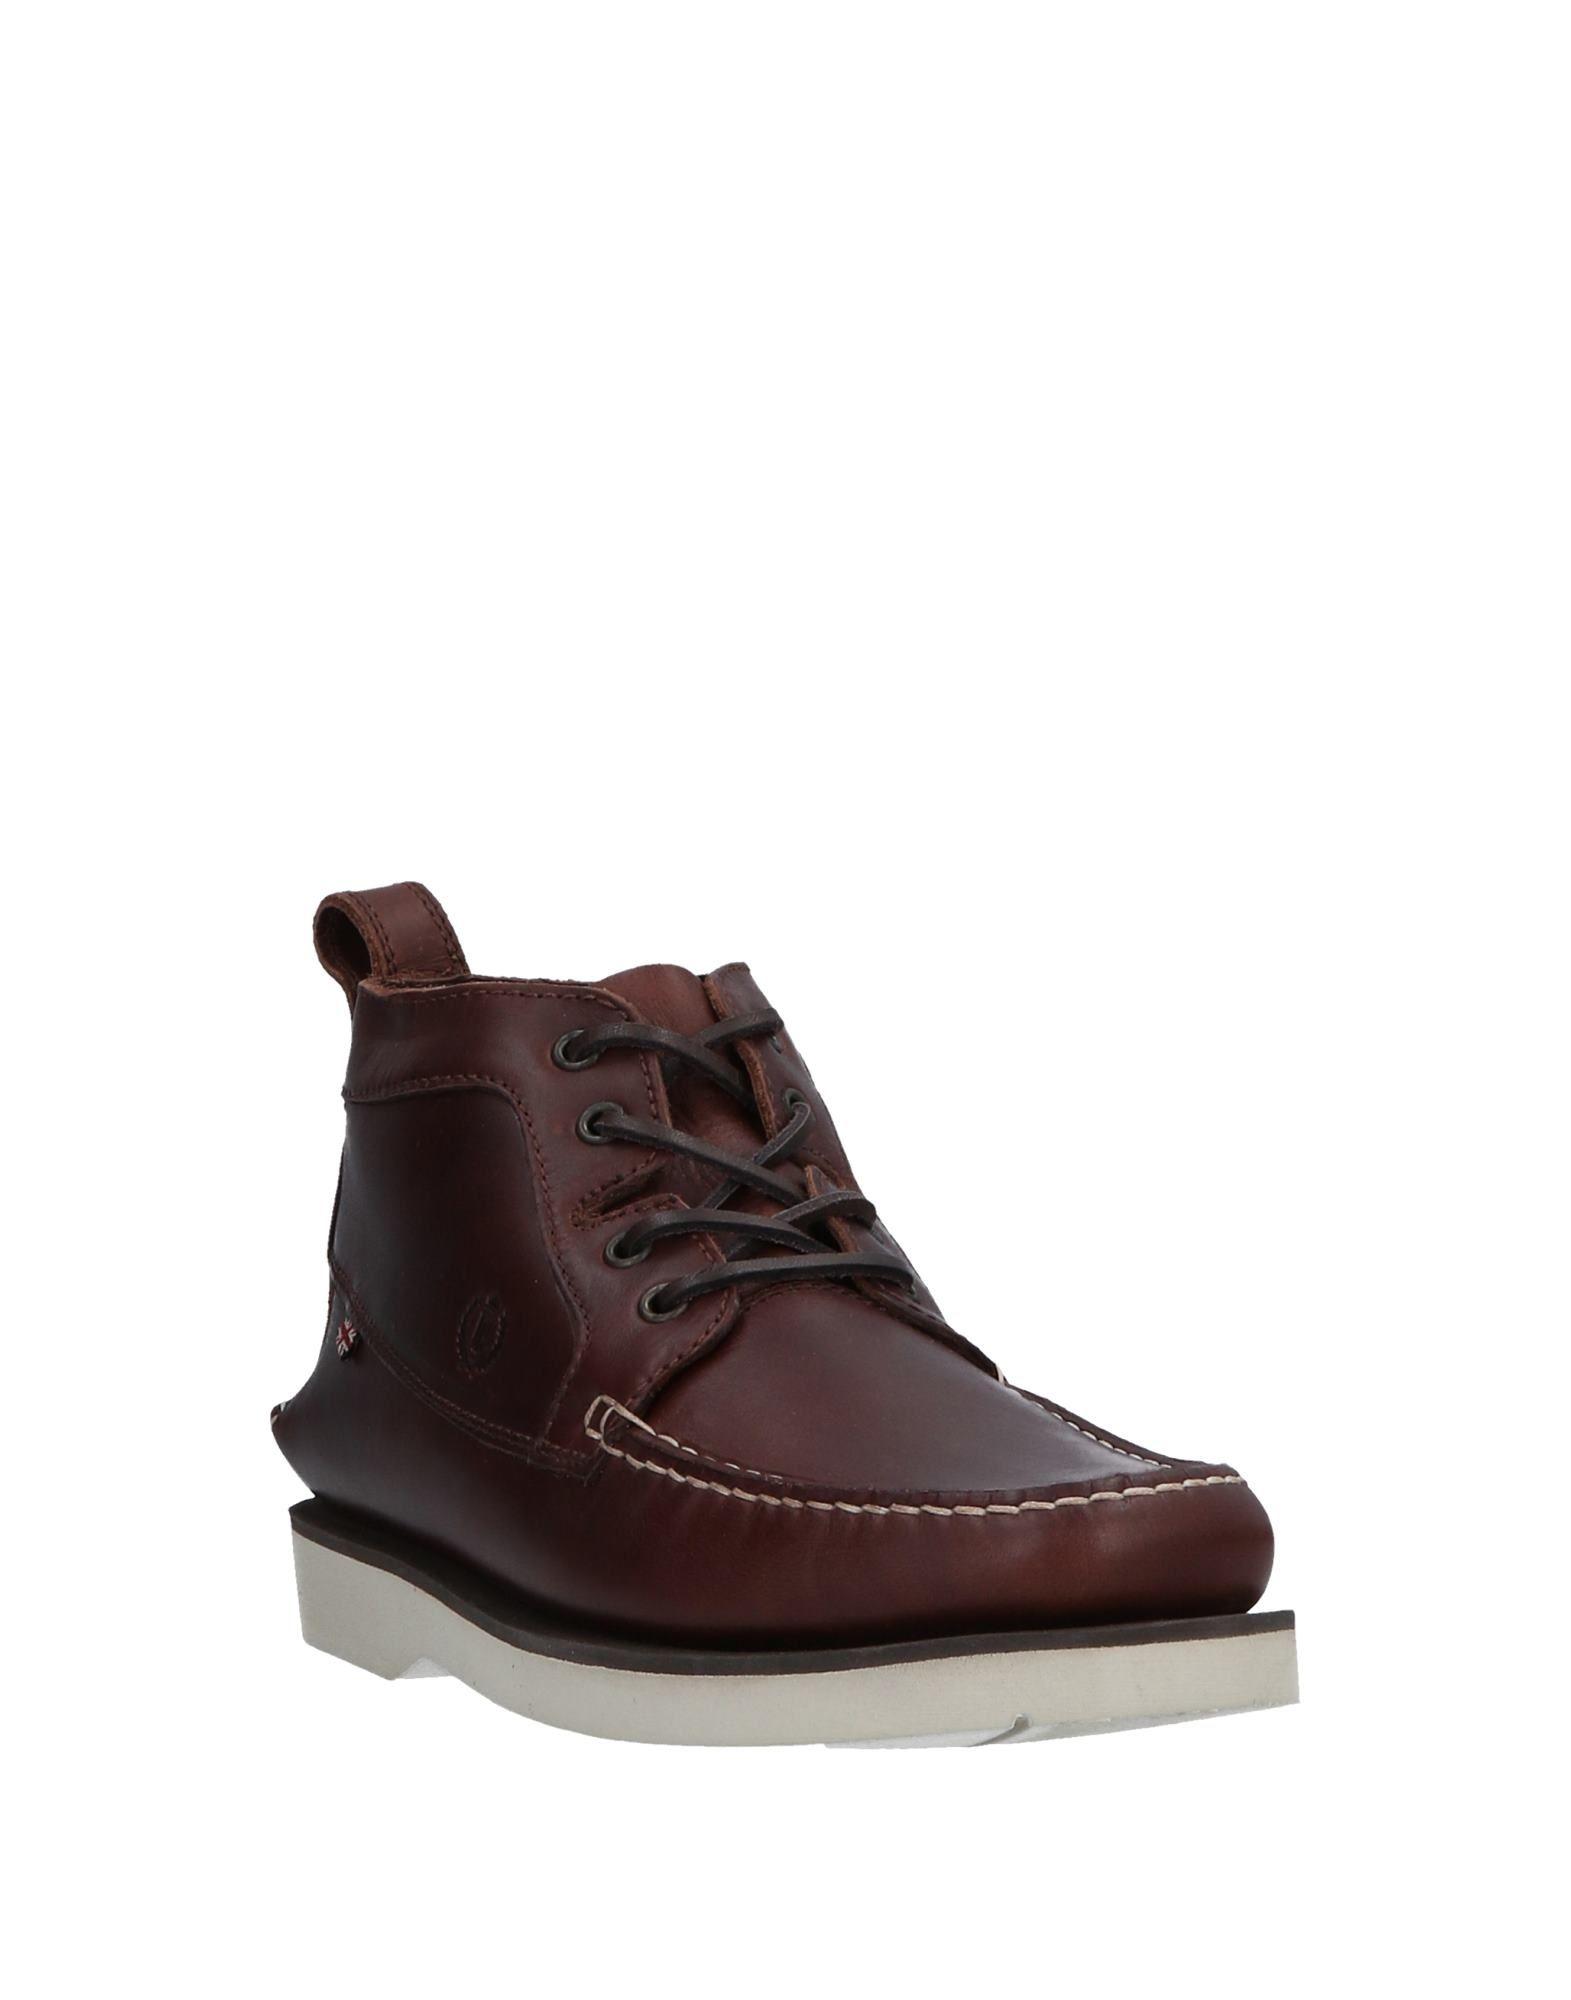 Henri Lloyd Leather Ankle Boots in Dark Brown (Brown) for Men - Lyst